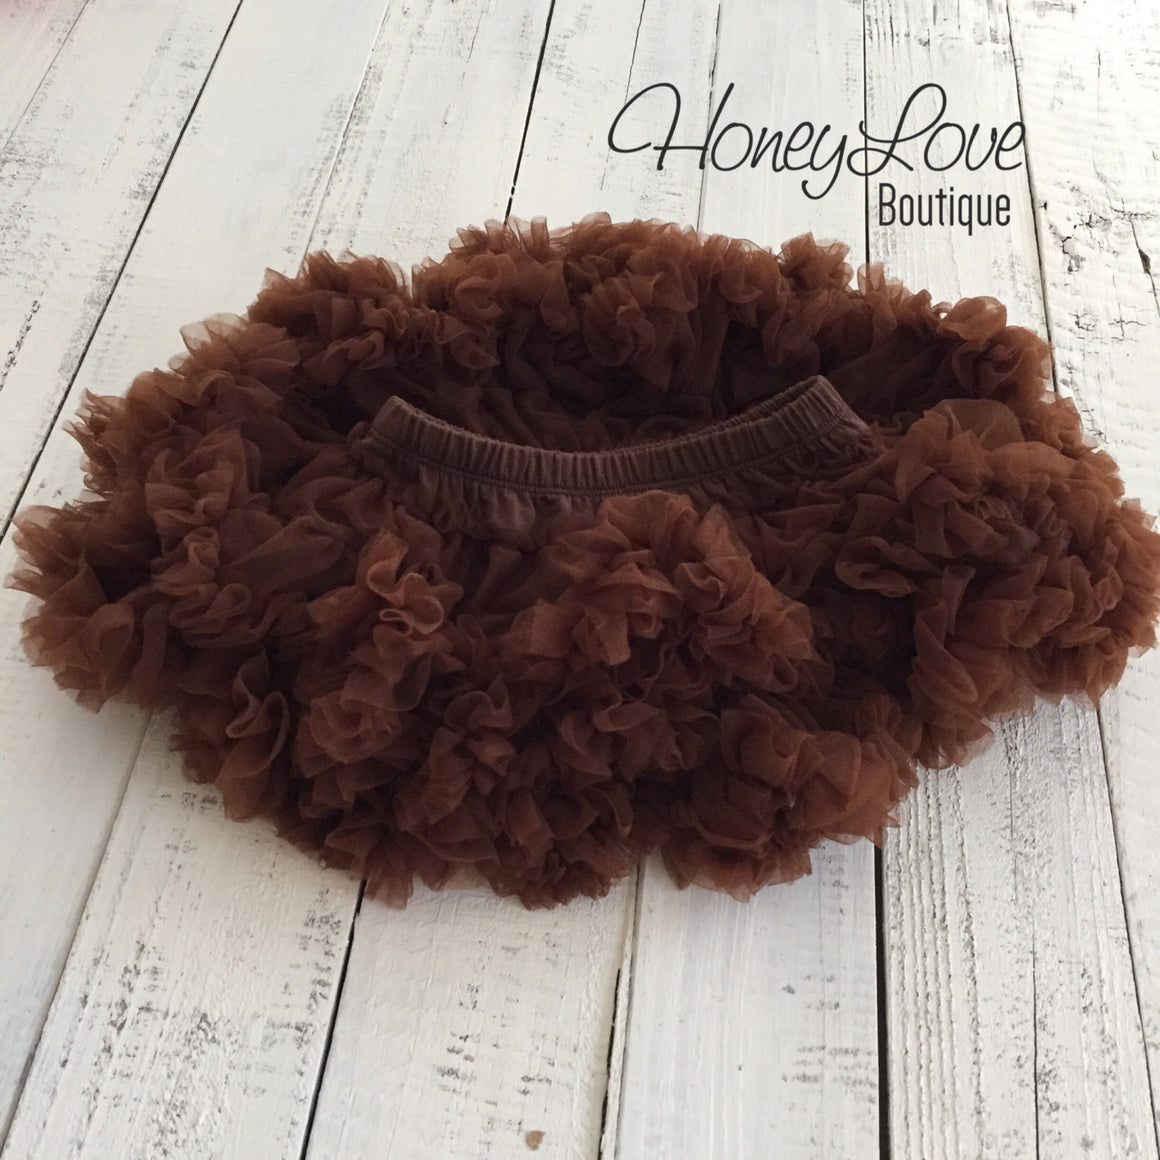 Thanksgiving Fall Halloween outfit - Brown/orange flower headband and leg warmers - HoneyLoveBoutique